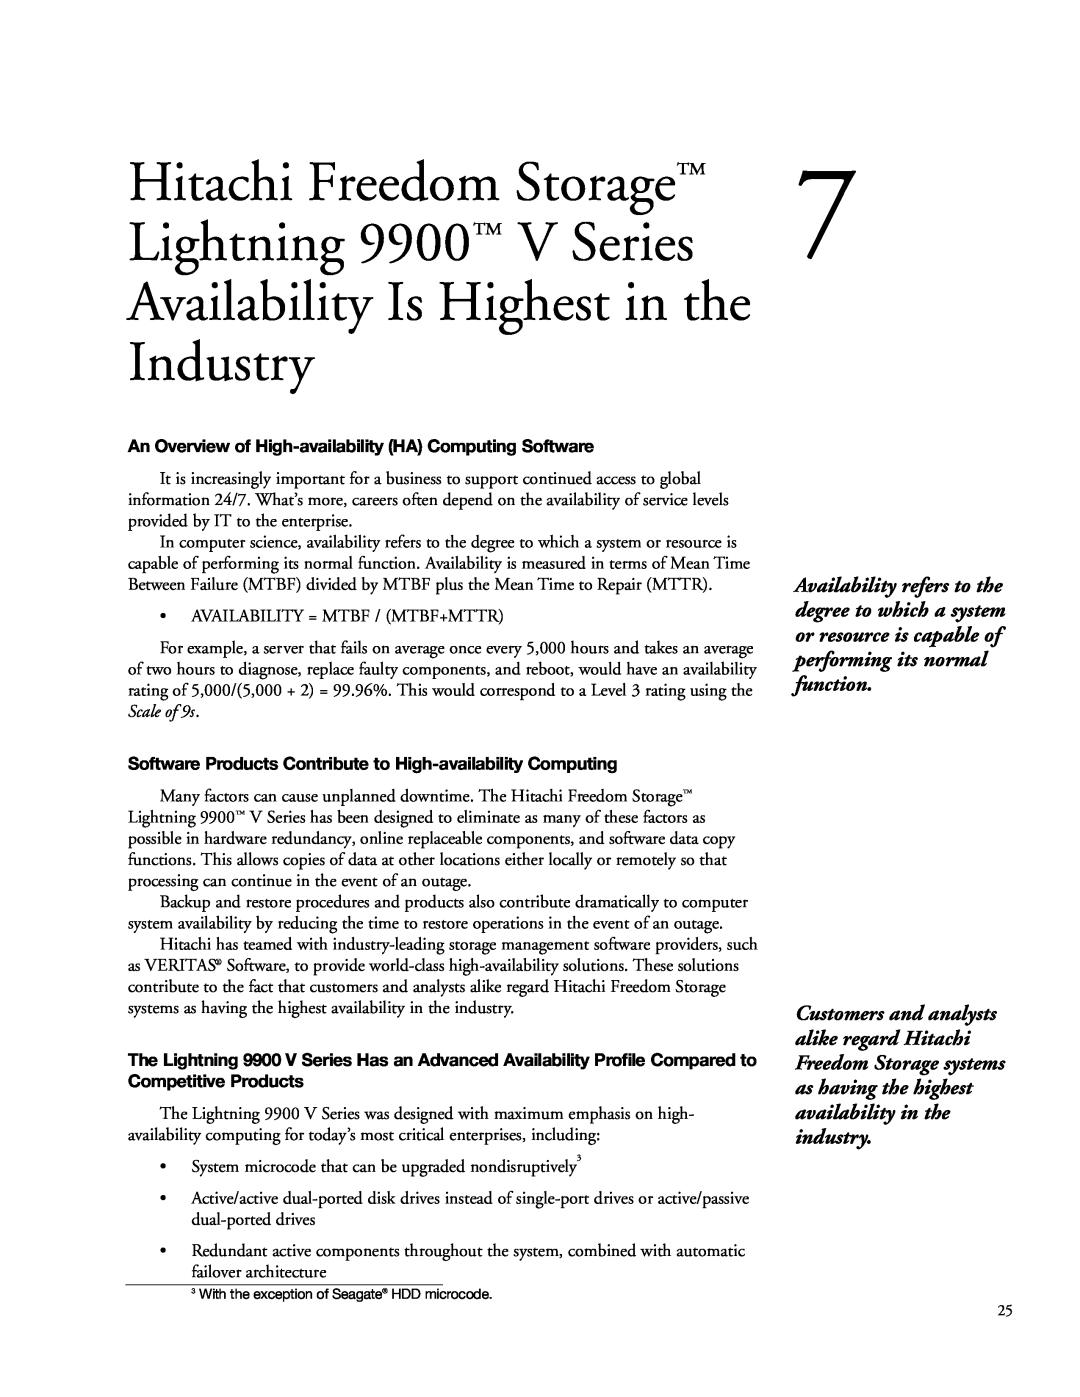 Hitachi manual Availability Is Highest in the Industry, Hitachi Freedom Storage, Lightning 9900 V Series 